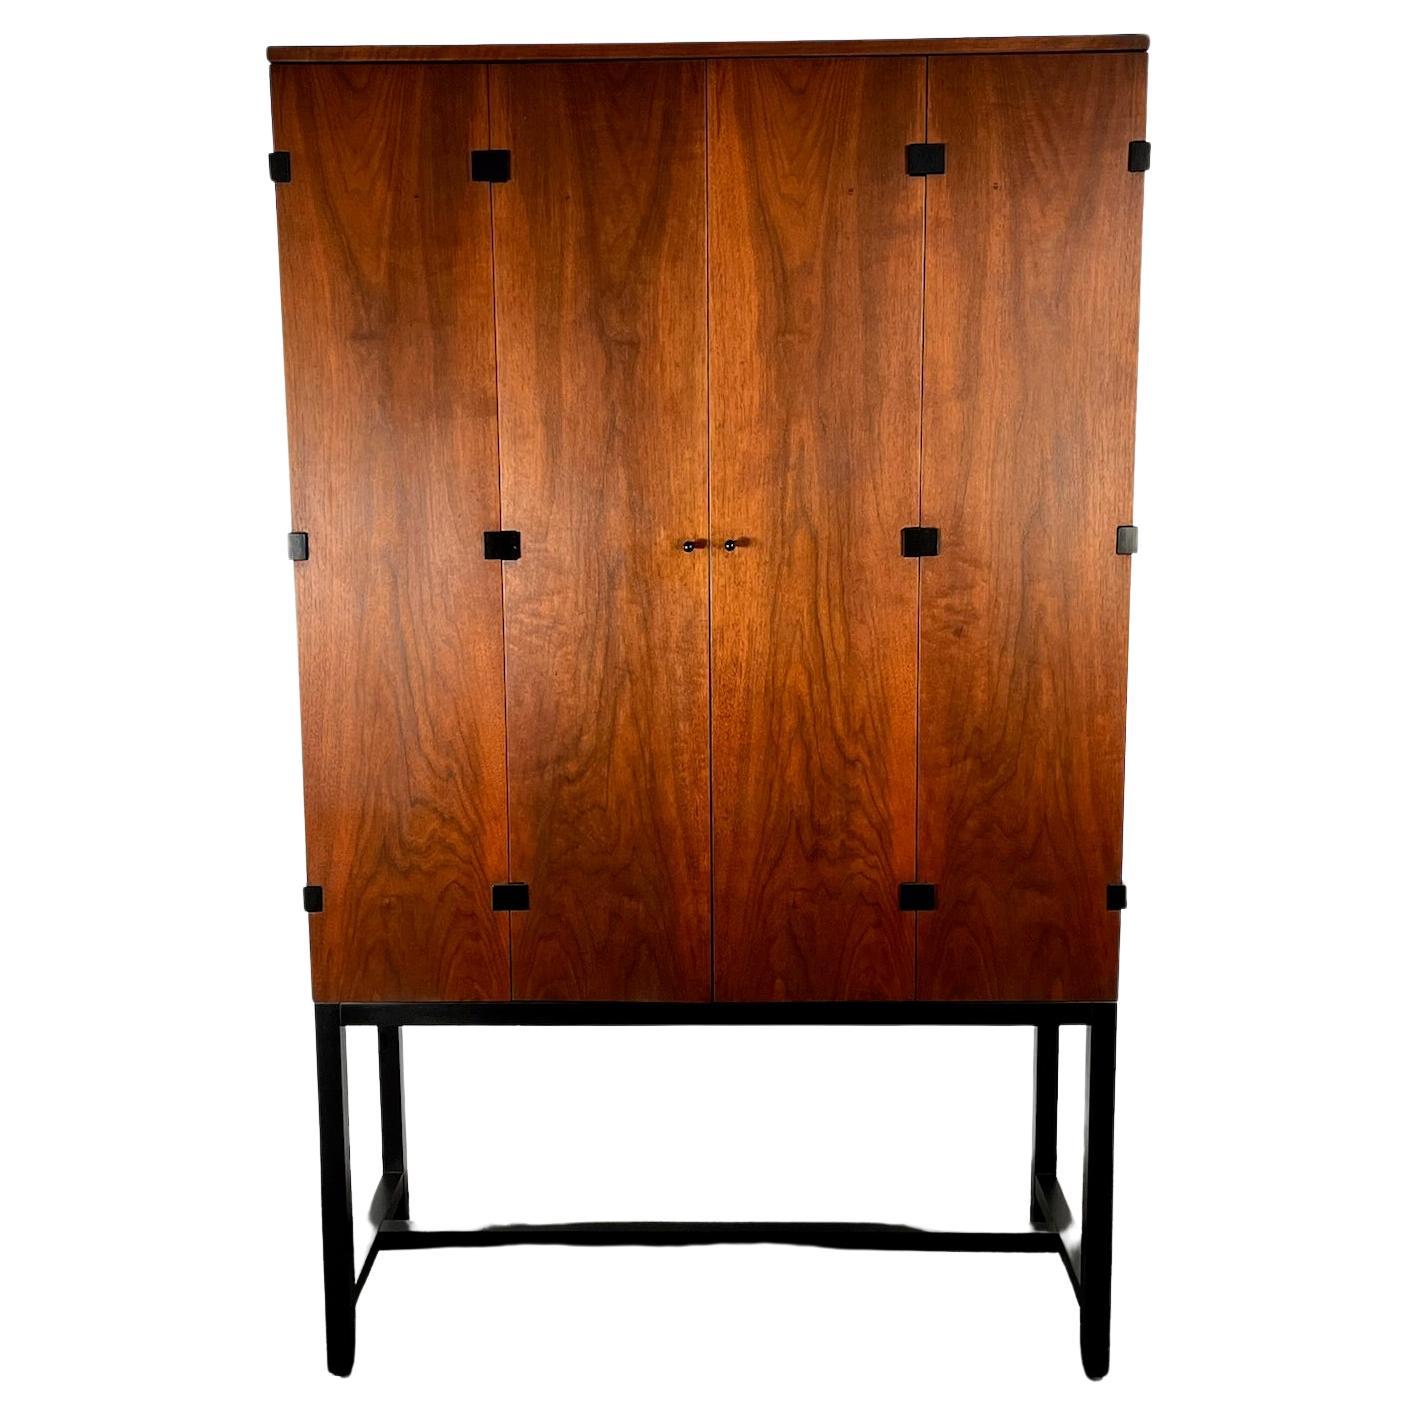 Milo Baughman Cabinet in Walnut and Black Lacquer for Directional